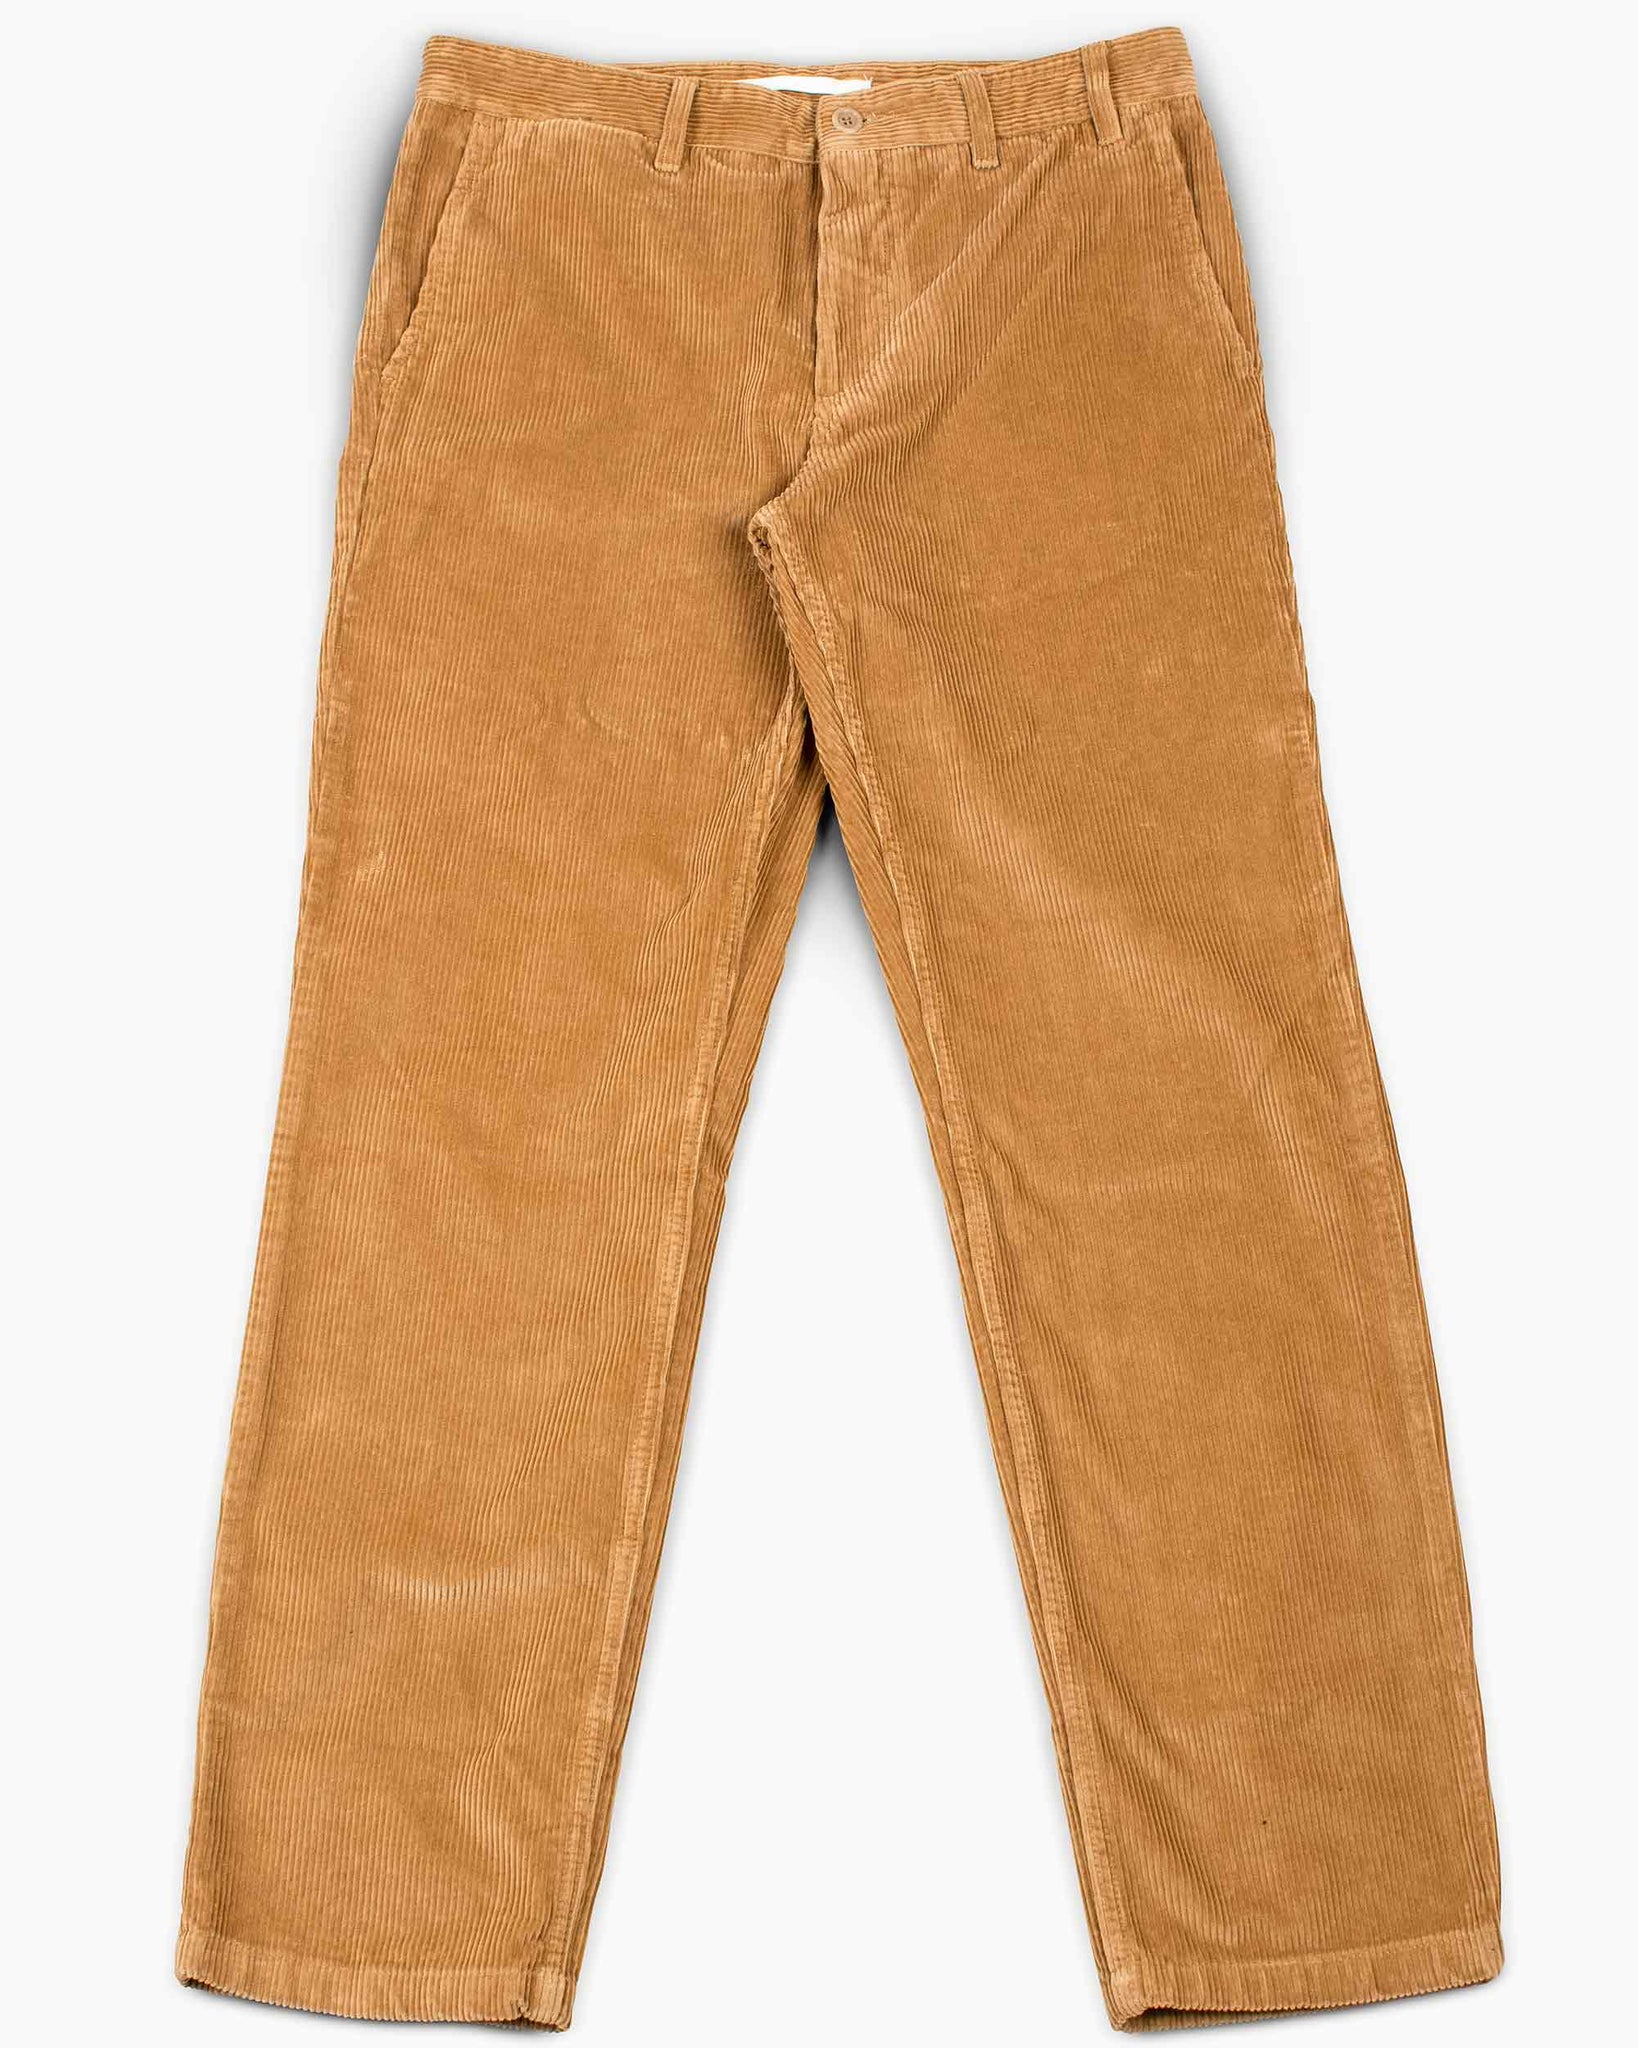 Norse Store  Shipping Worldwide - Sunflower Soft Trouser - Brown